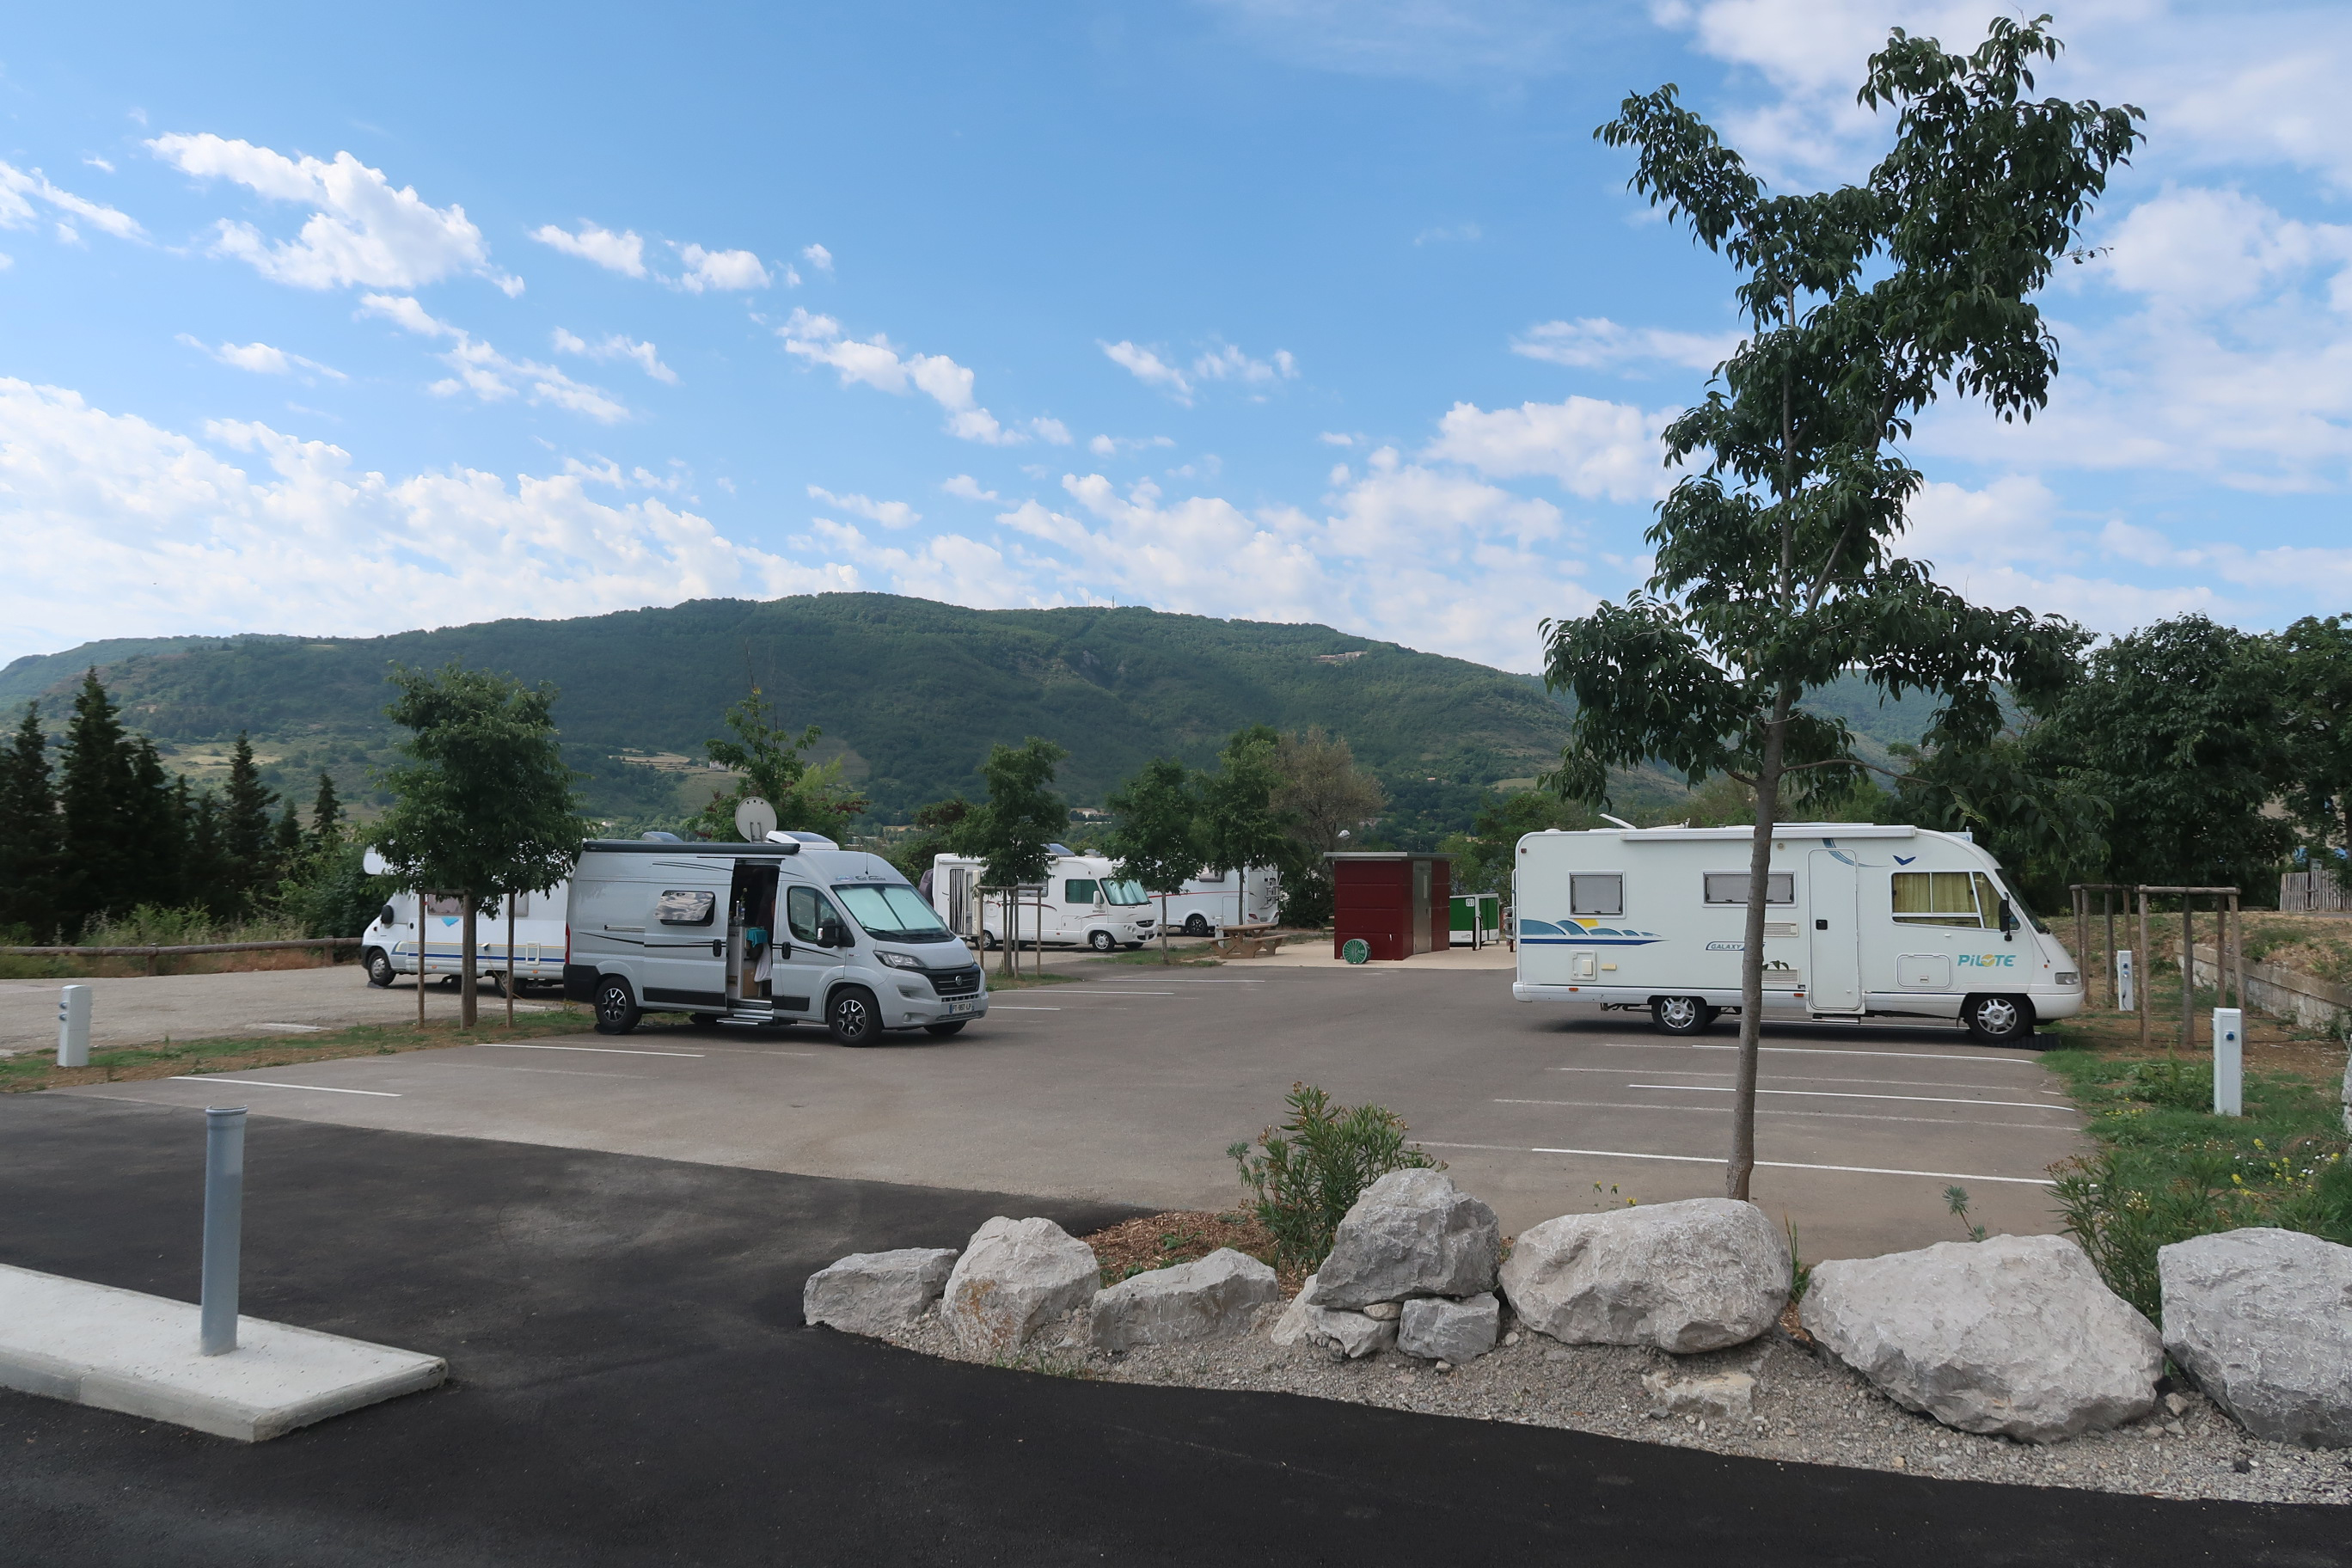 Camping : Aire de service camping-car communale